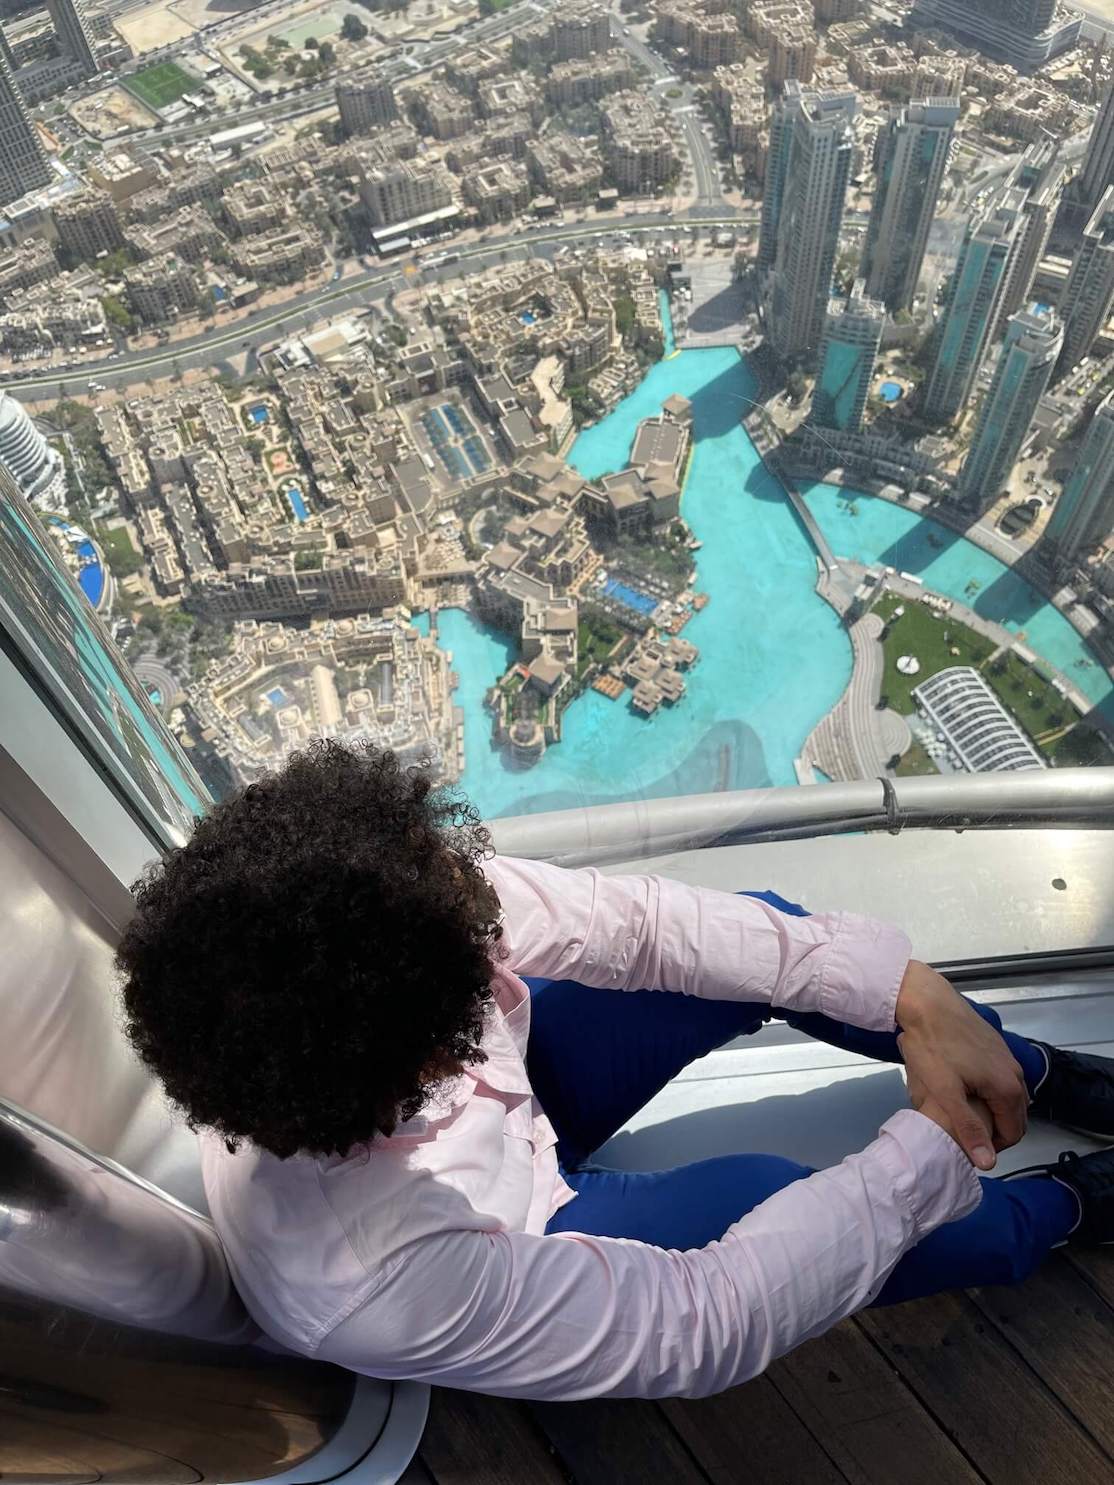 The view from the 124th floor of Burj_khalifa